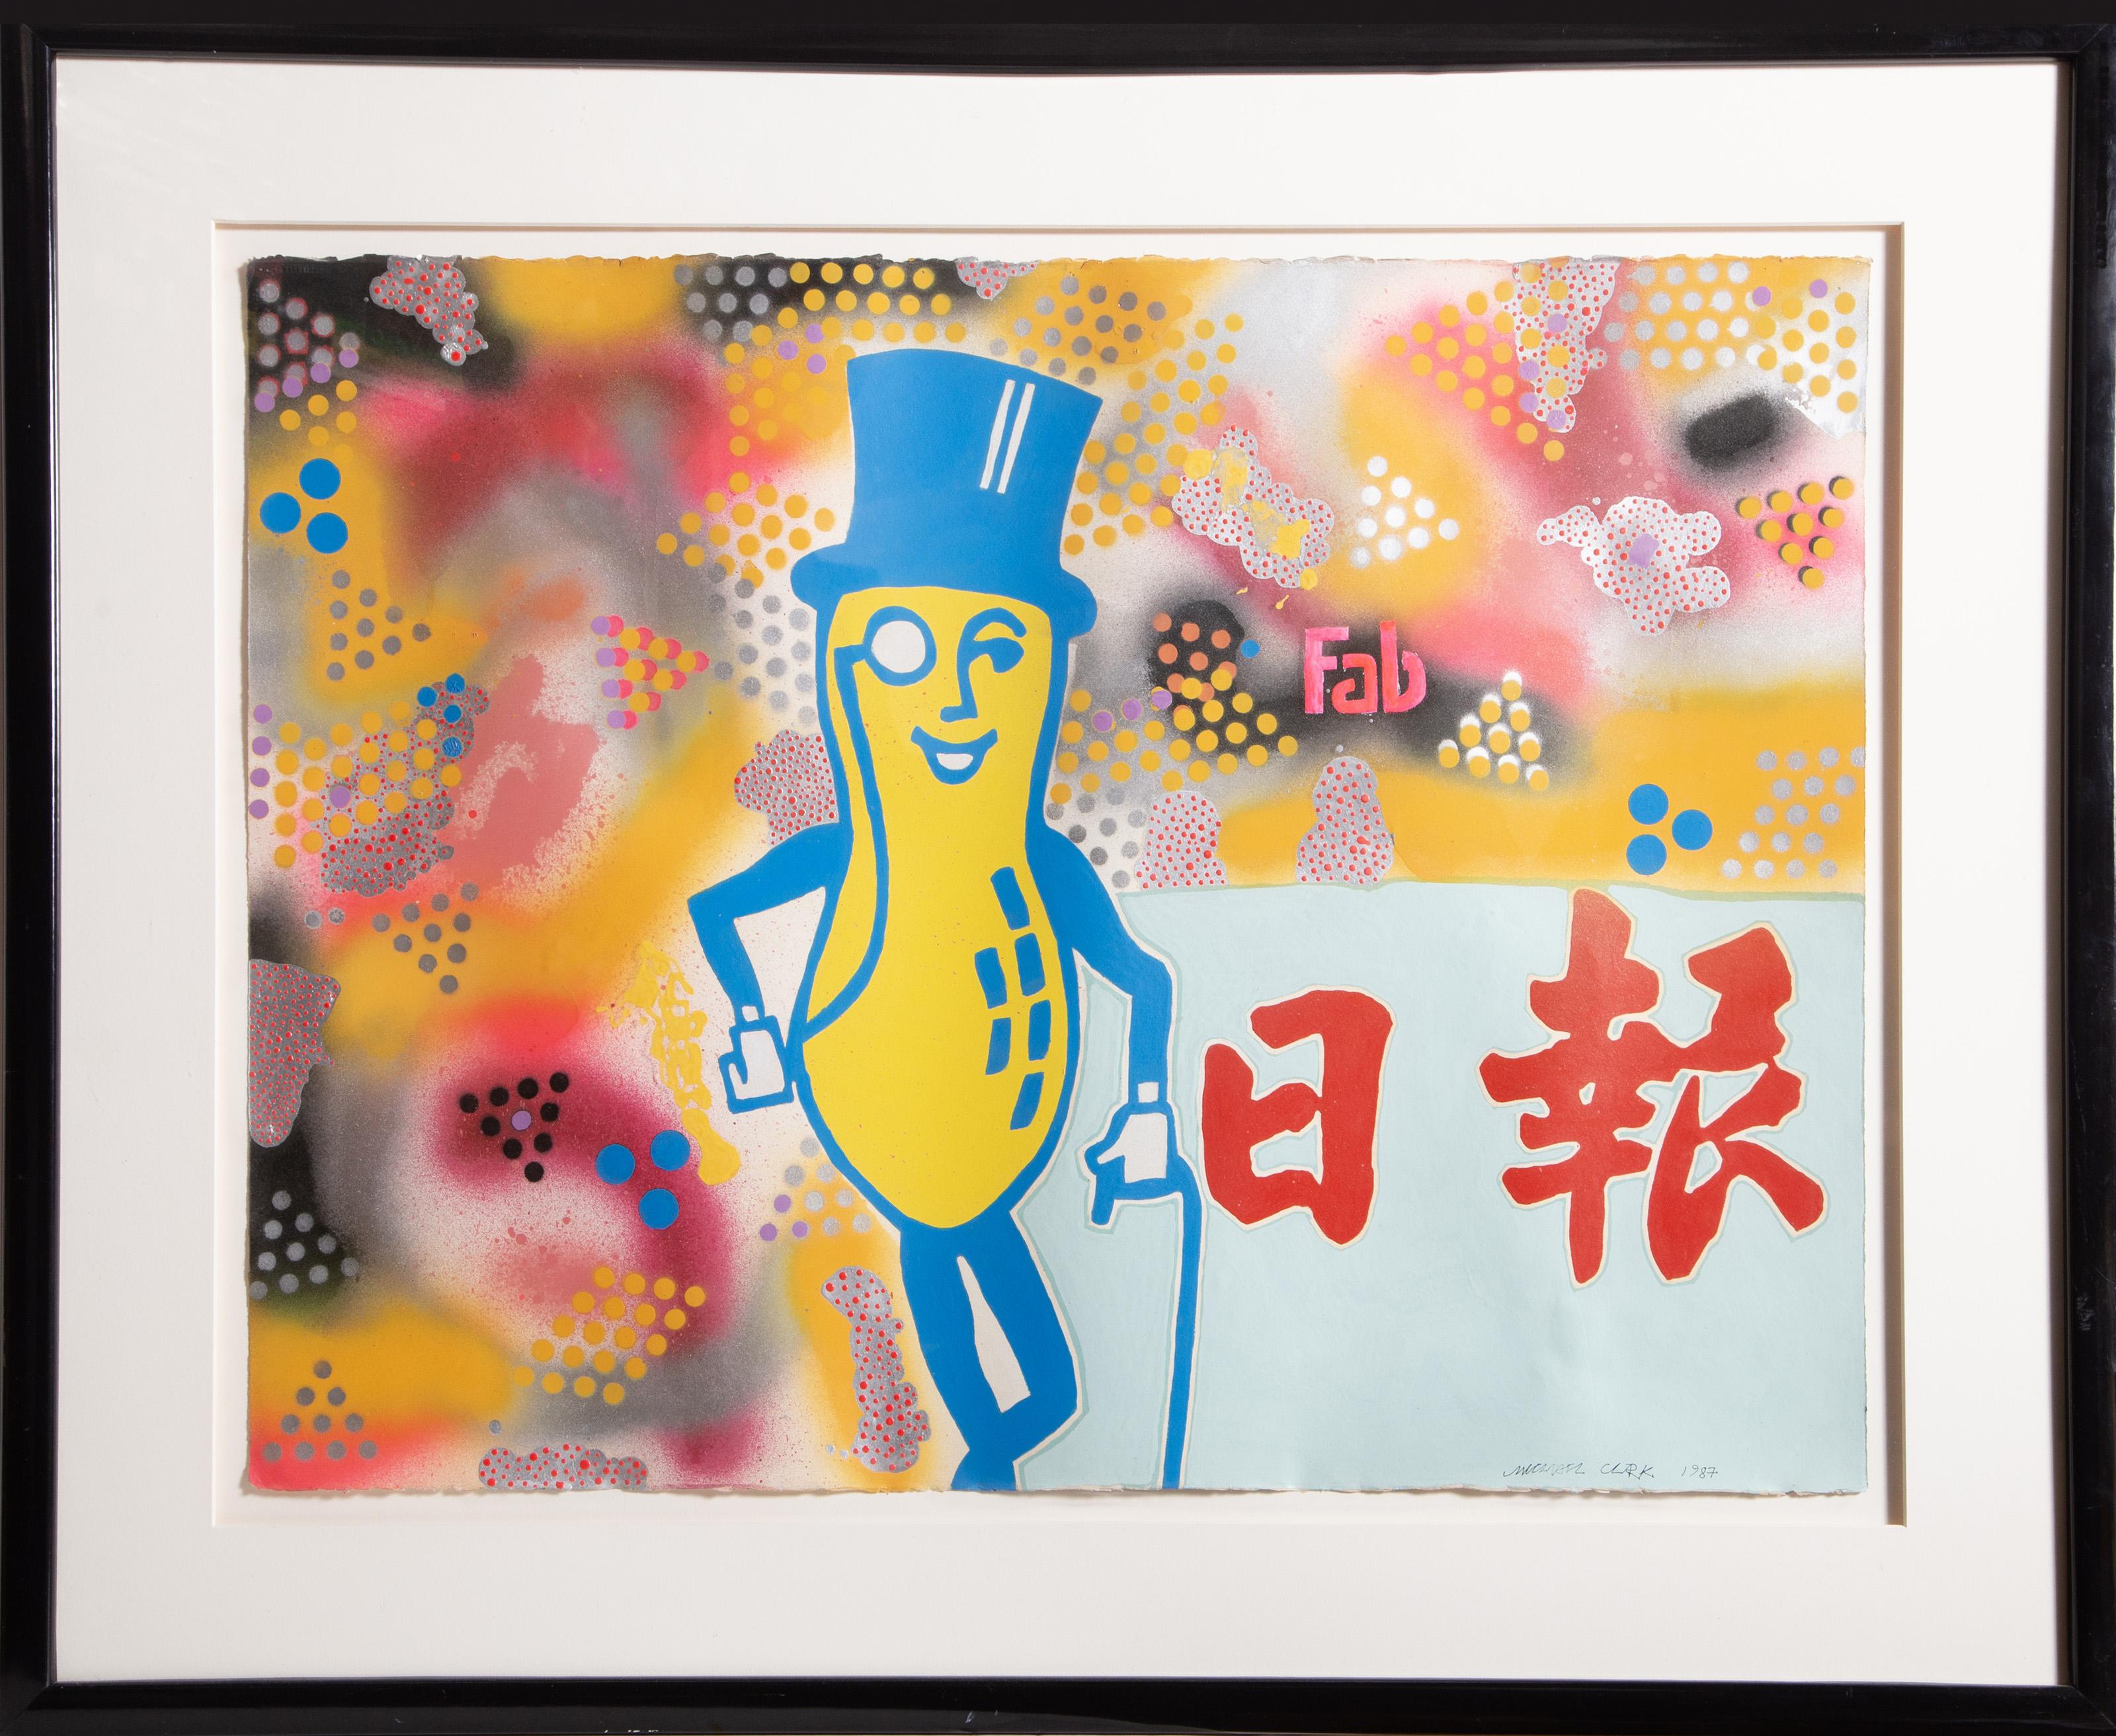 Mr Peanut
Michael Clark, British (1954)
Date: 1987
Acrylic, Screenprint, Aerosol on Arches, signed and dated in pencil lower right
Size: 22 x 29.5 in. (55.88 x 74.93 cm)
Frame Size: 31 x 38.5 inches